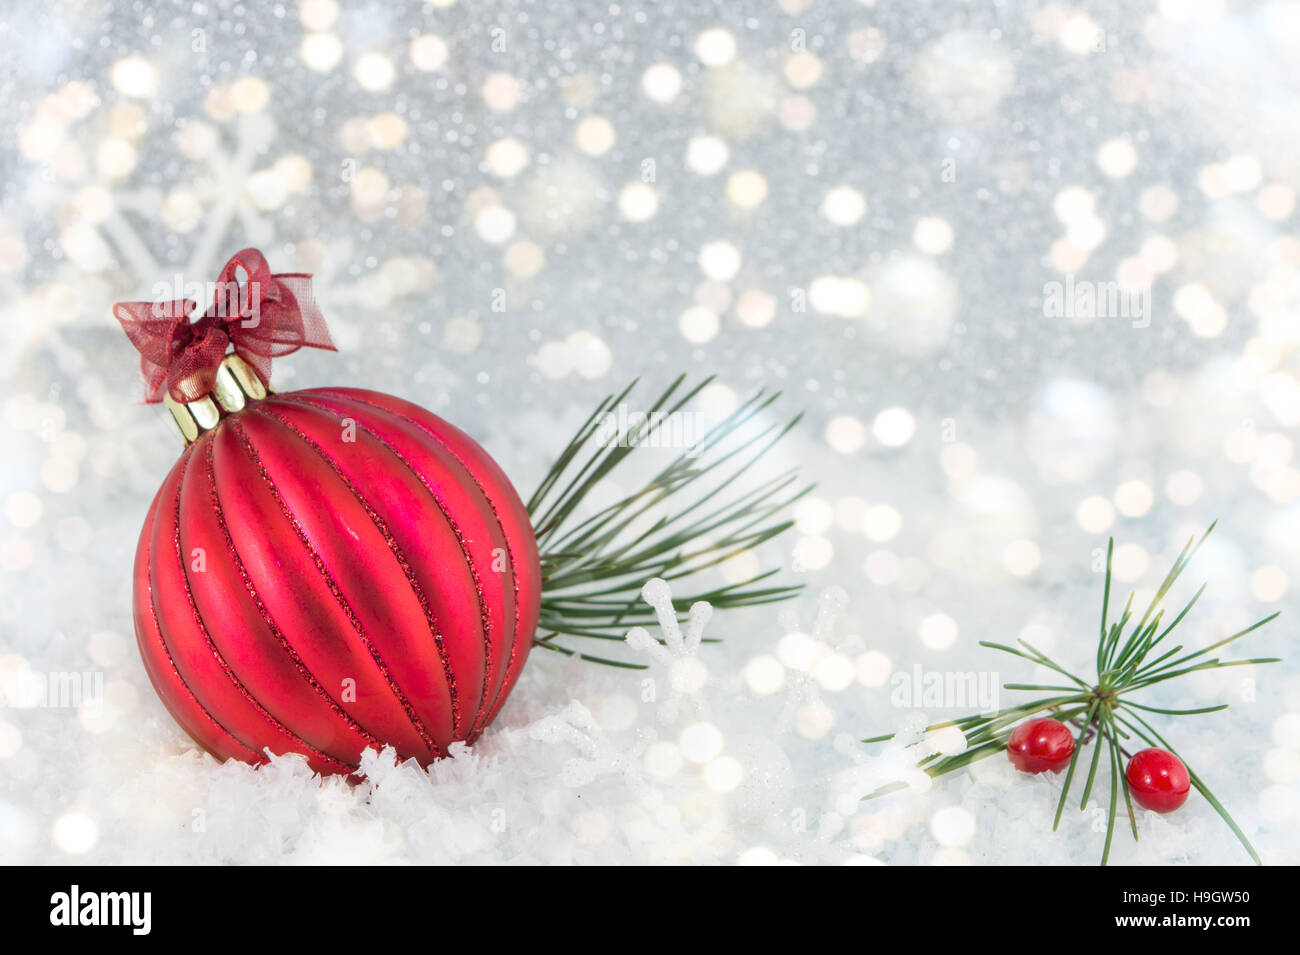 Red Christmas ball on shiny silver background Stock Photo